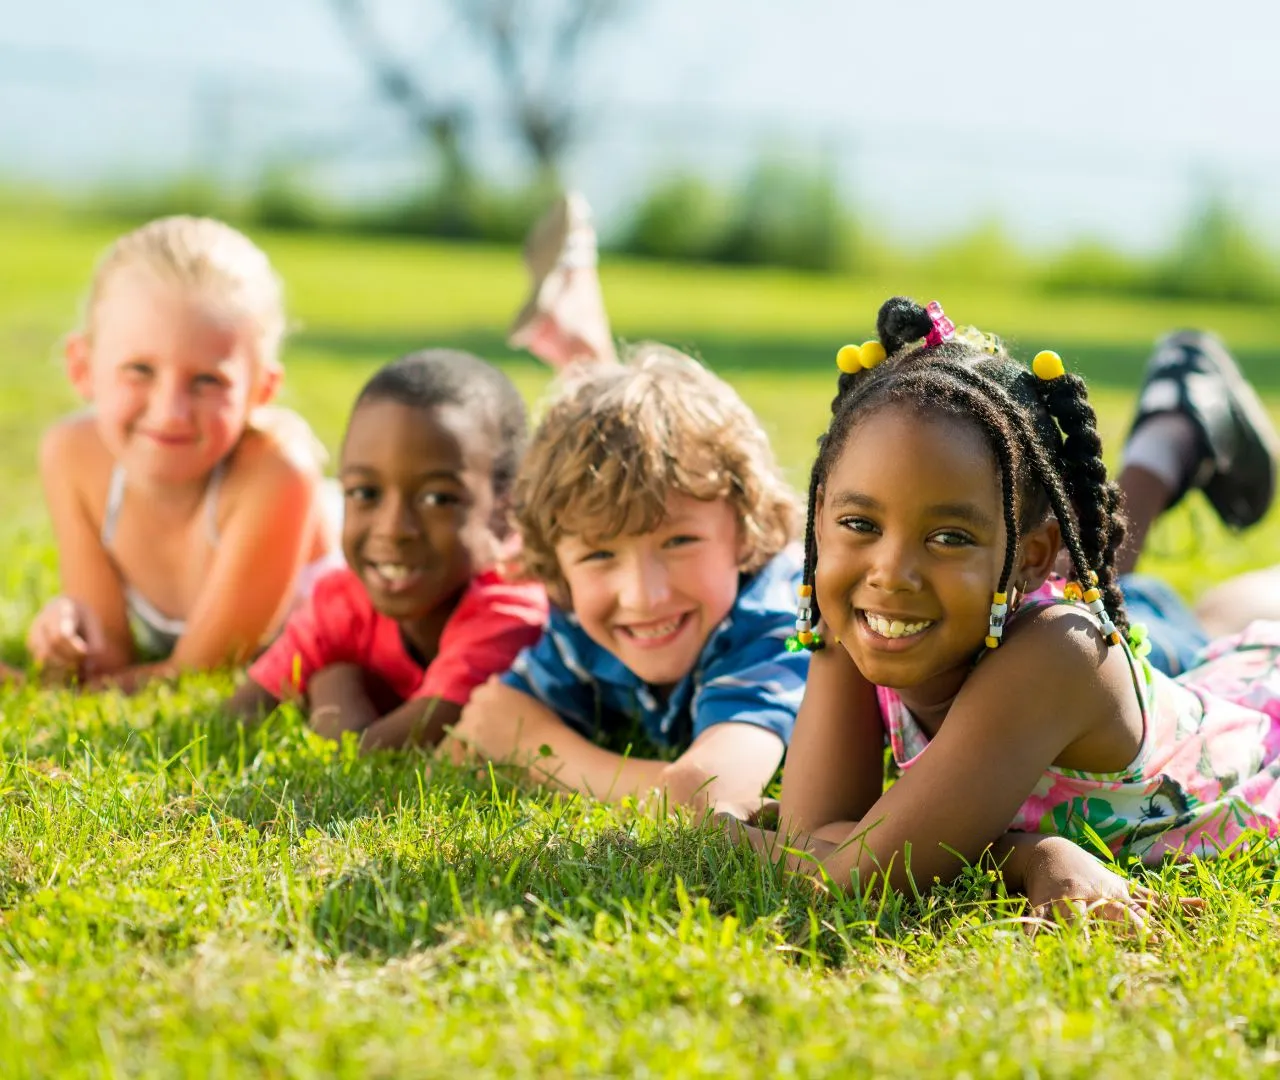 Four children laying on their bellies in the grass. All of them are smiling at the camera. From left to right, the children are white, Black, white, and Black.